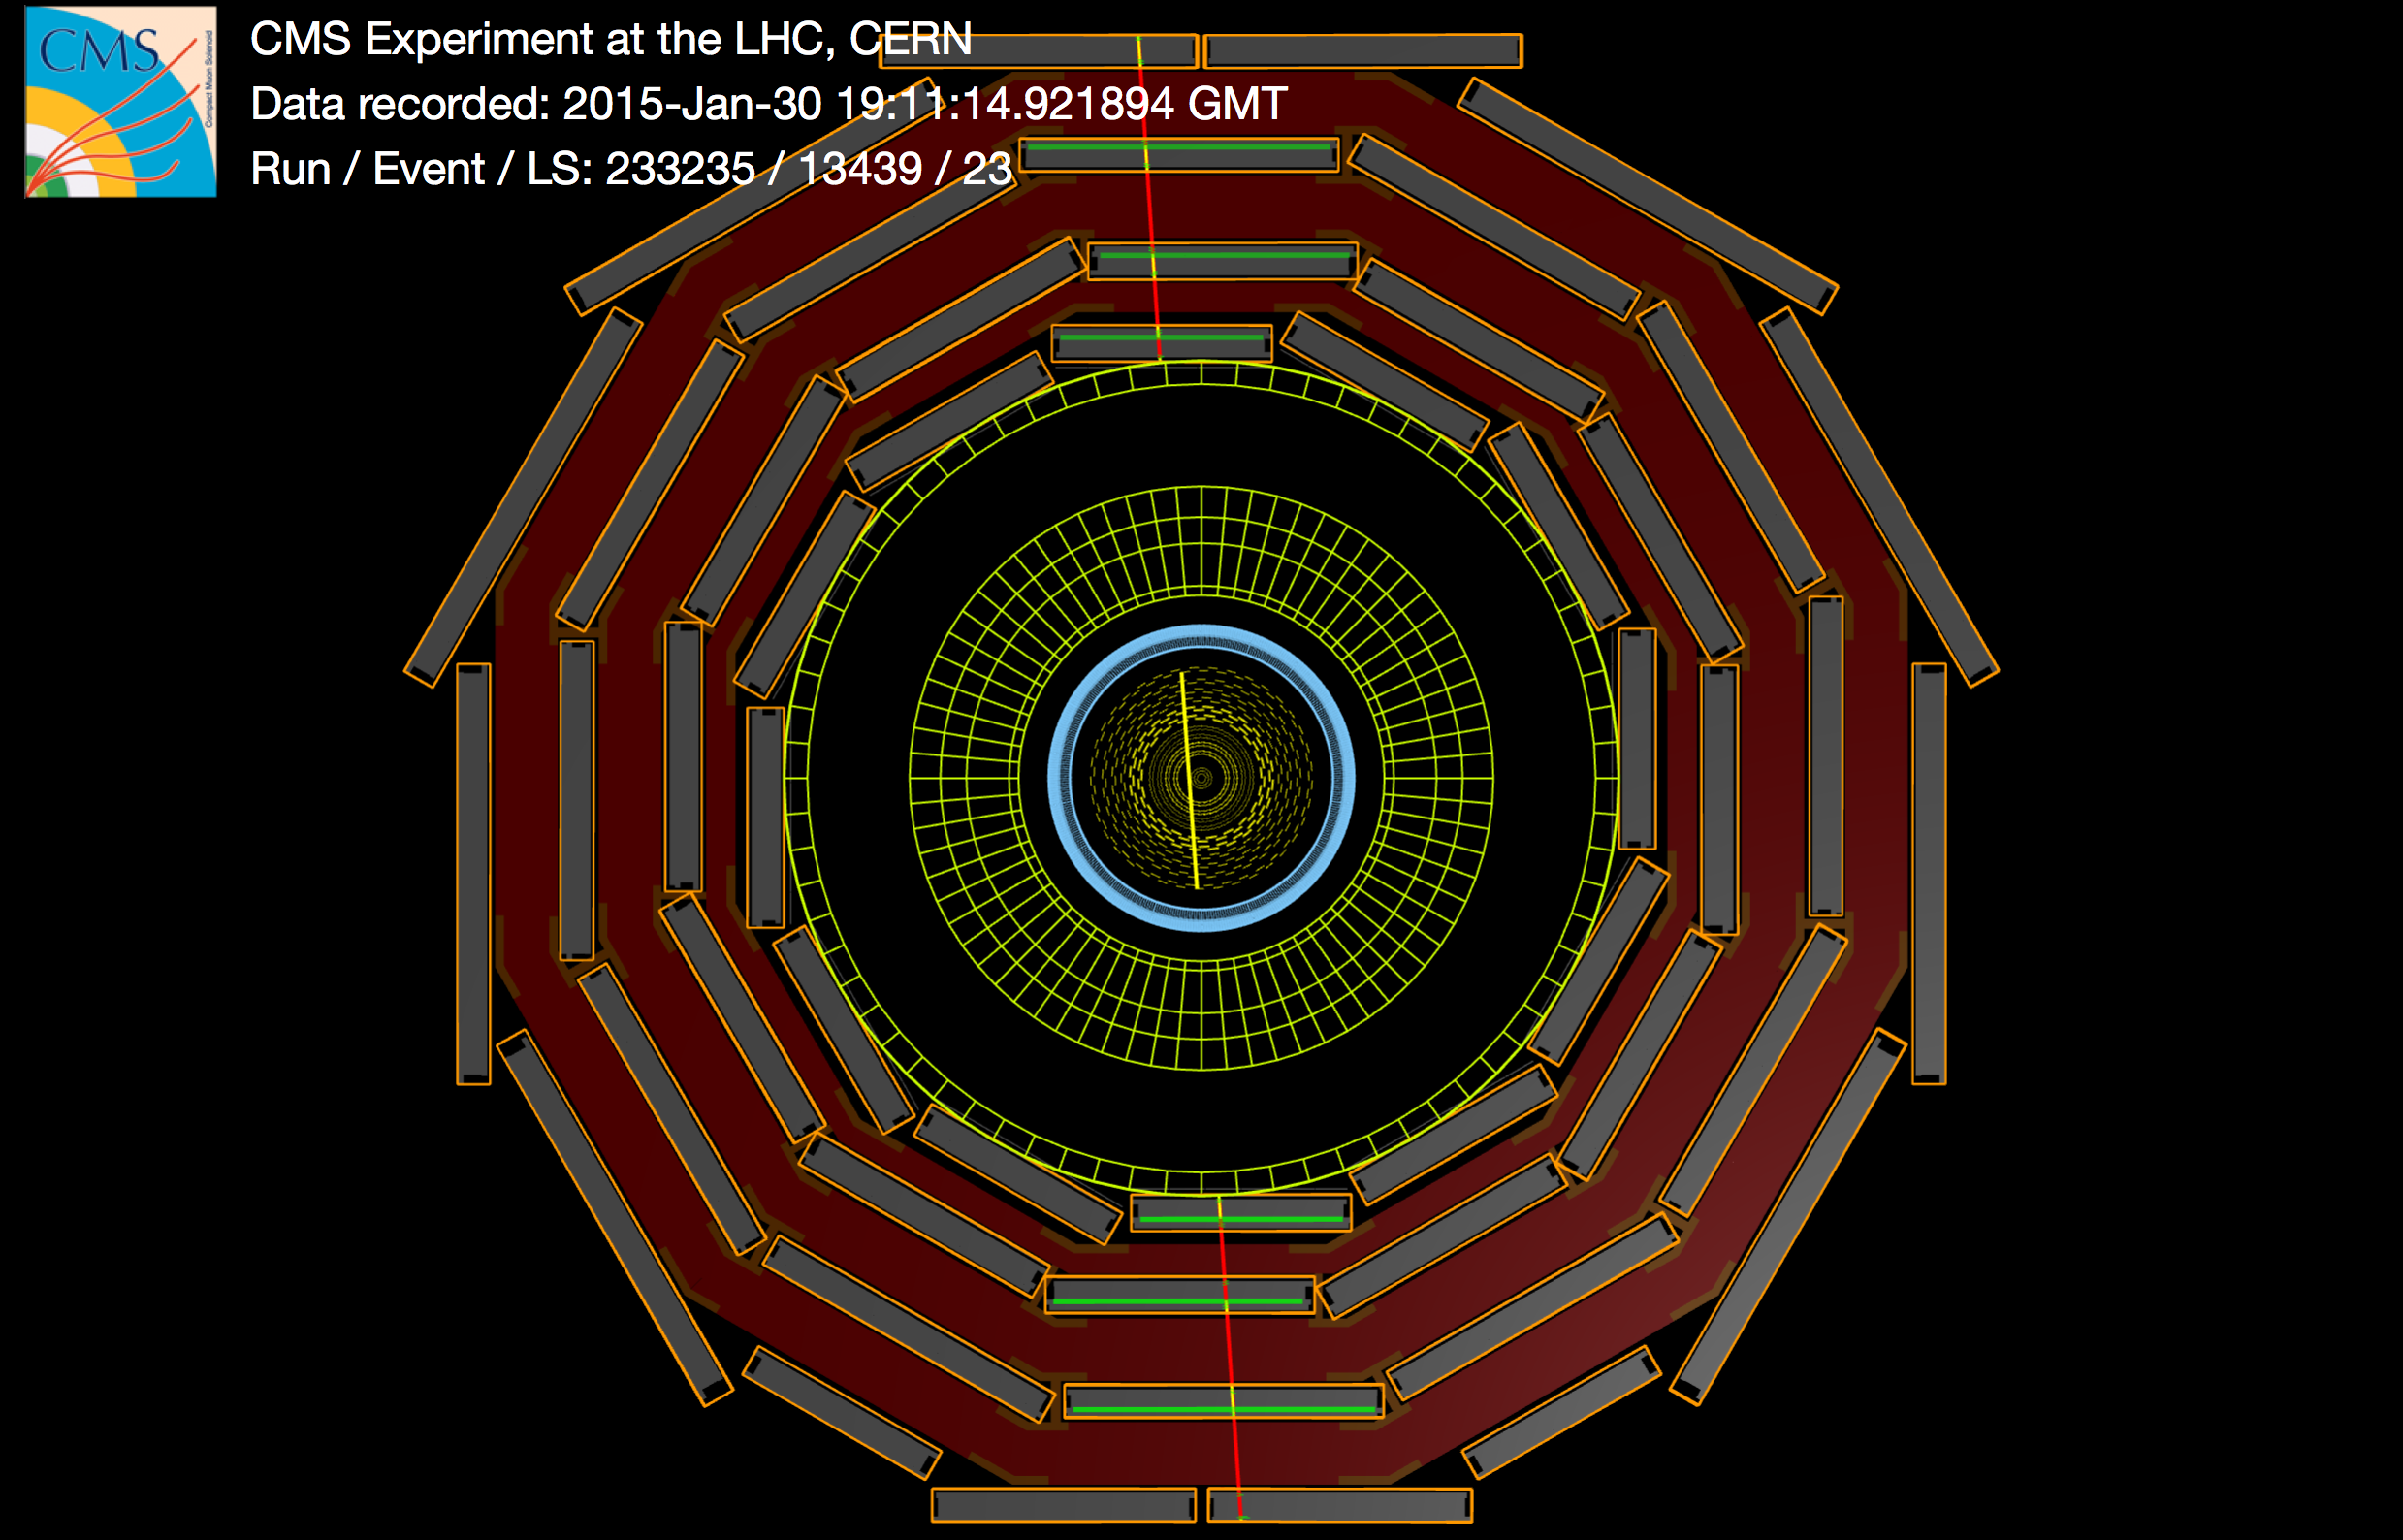 Before proton collisions take place again at the LHC, the CMS detector has been looking at the result of collisions of cosmic particles high up in the atmosphere. This event display shows the track of a muon that reached the CMS detector 100 m underground and passed through the muon chambers (in red) and the silicon tracker (in yellow). Muons as this one are used to calibrate the detector in advance of proton collisions.